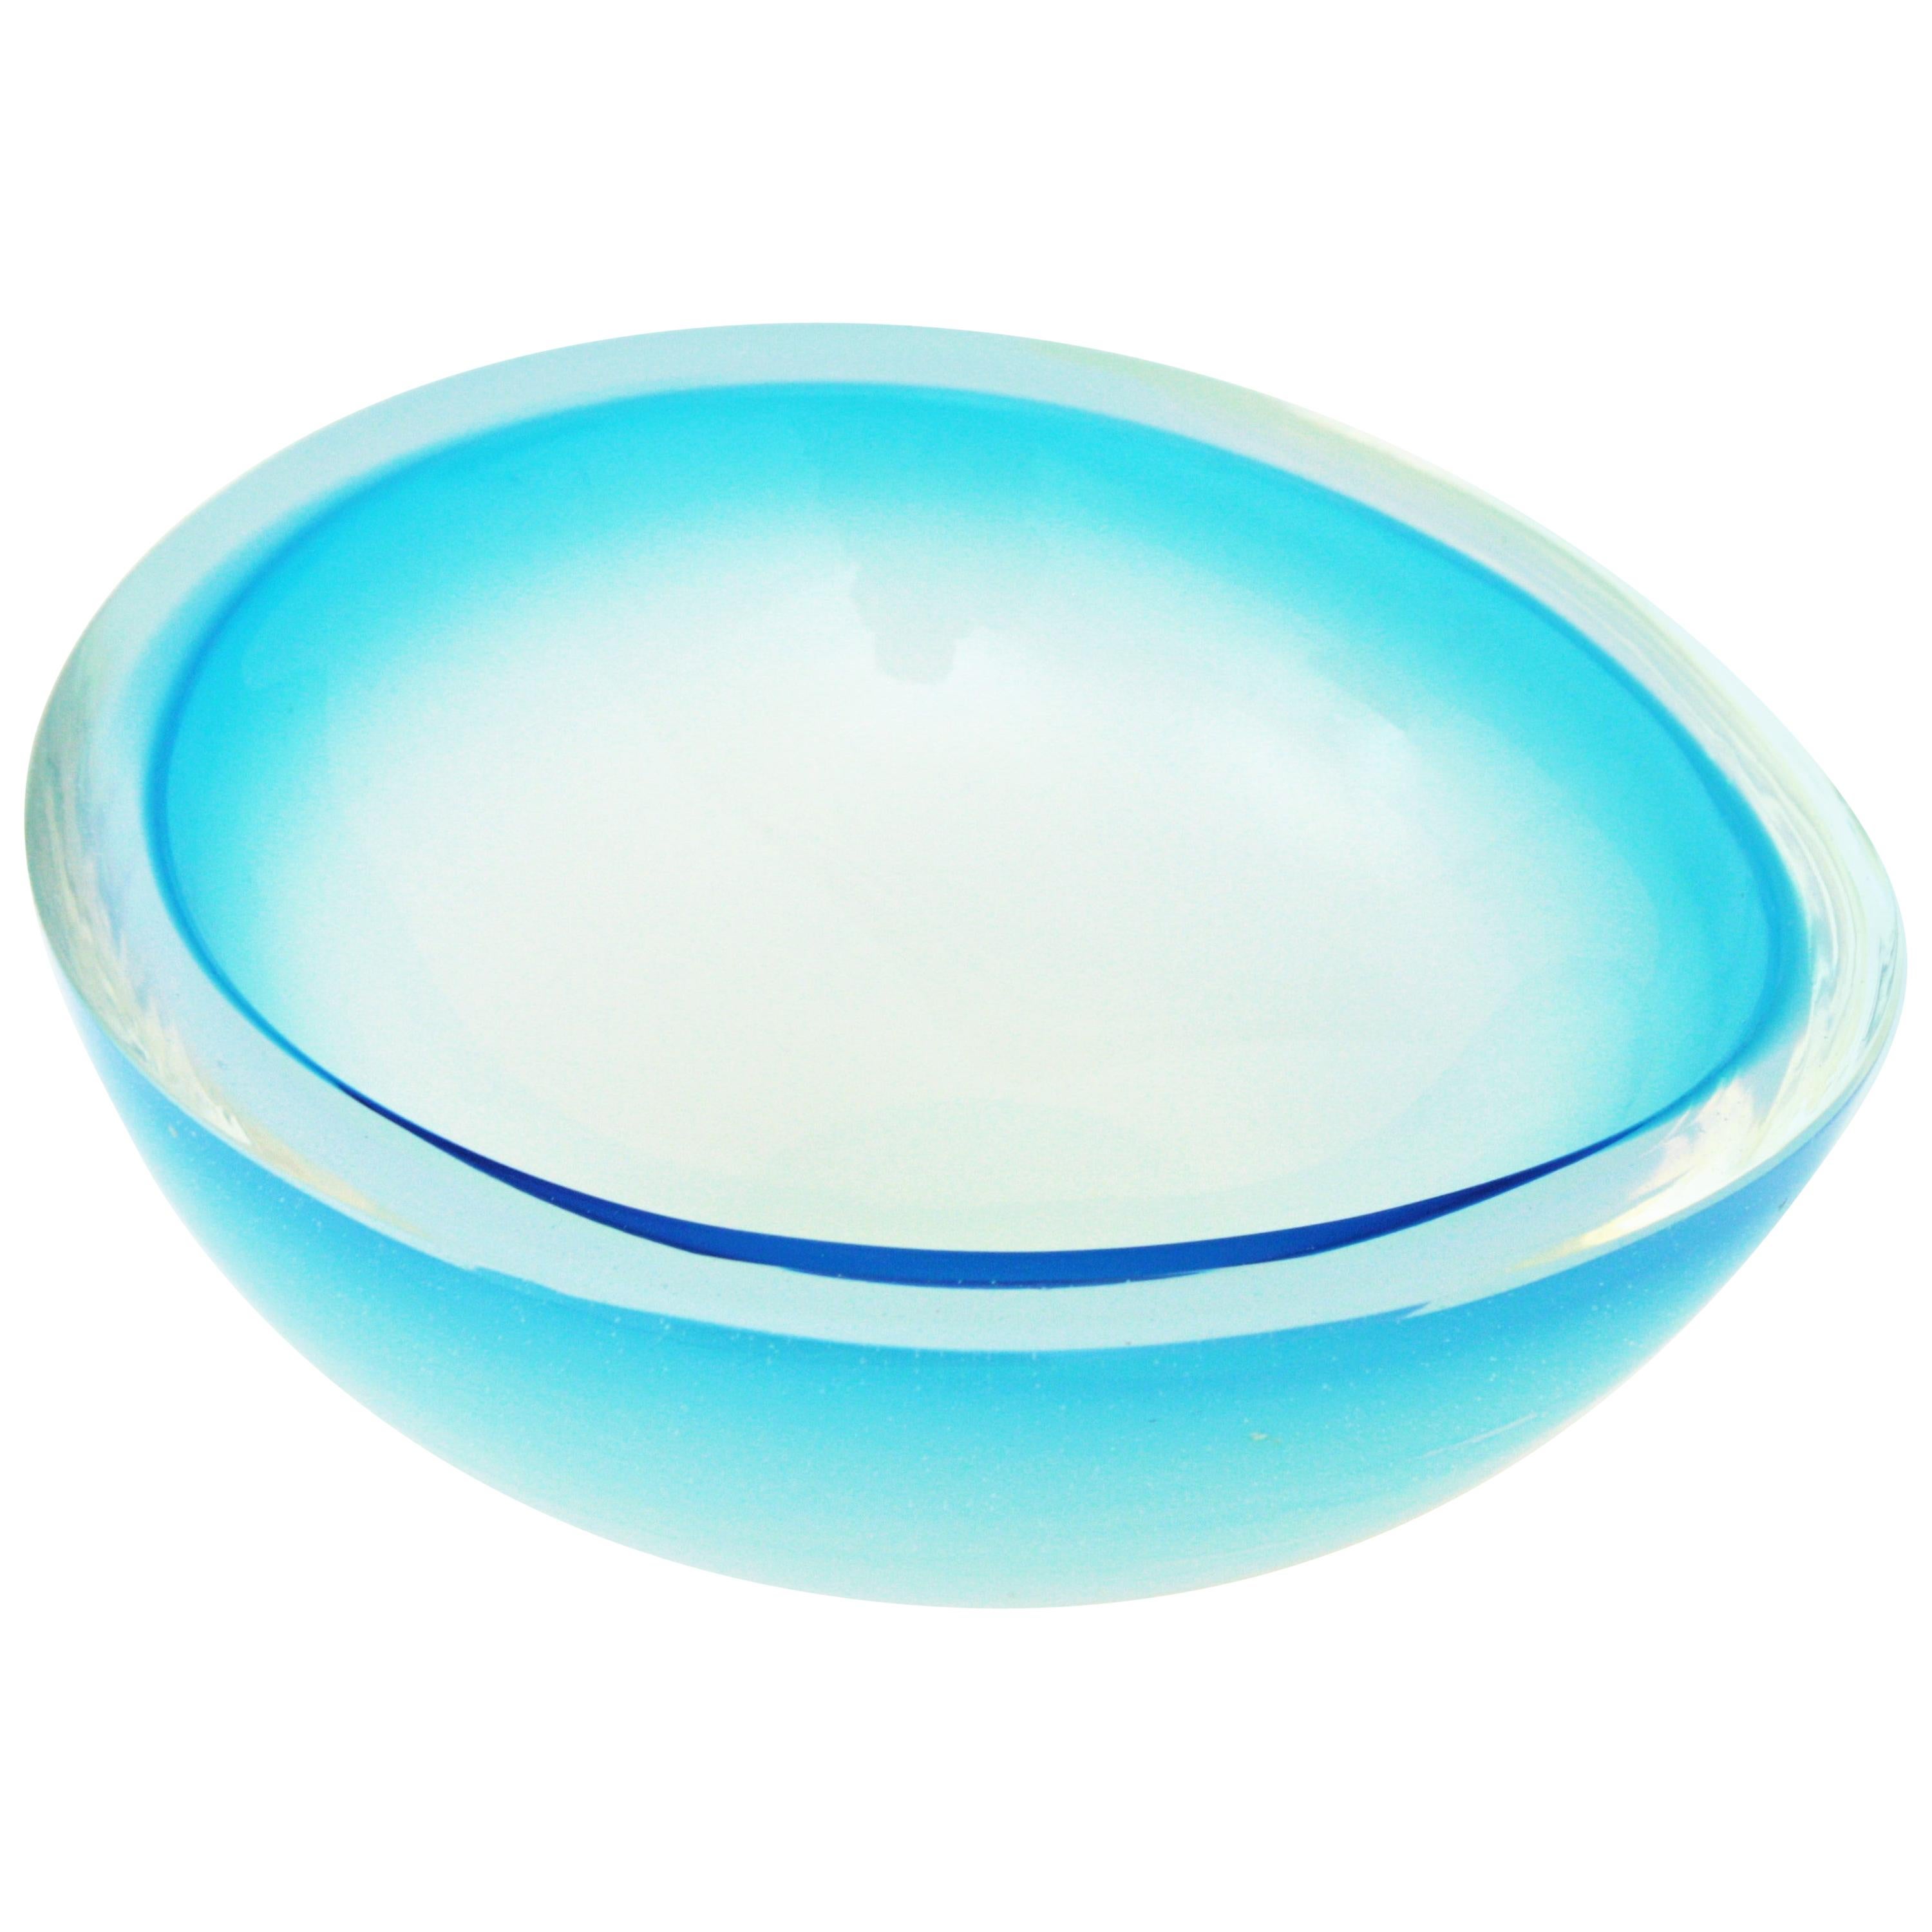 Archimede Seguso Murano Sommerso Opal Blue Art Glass Ovoid Centerpiece Bowl